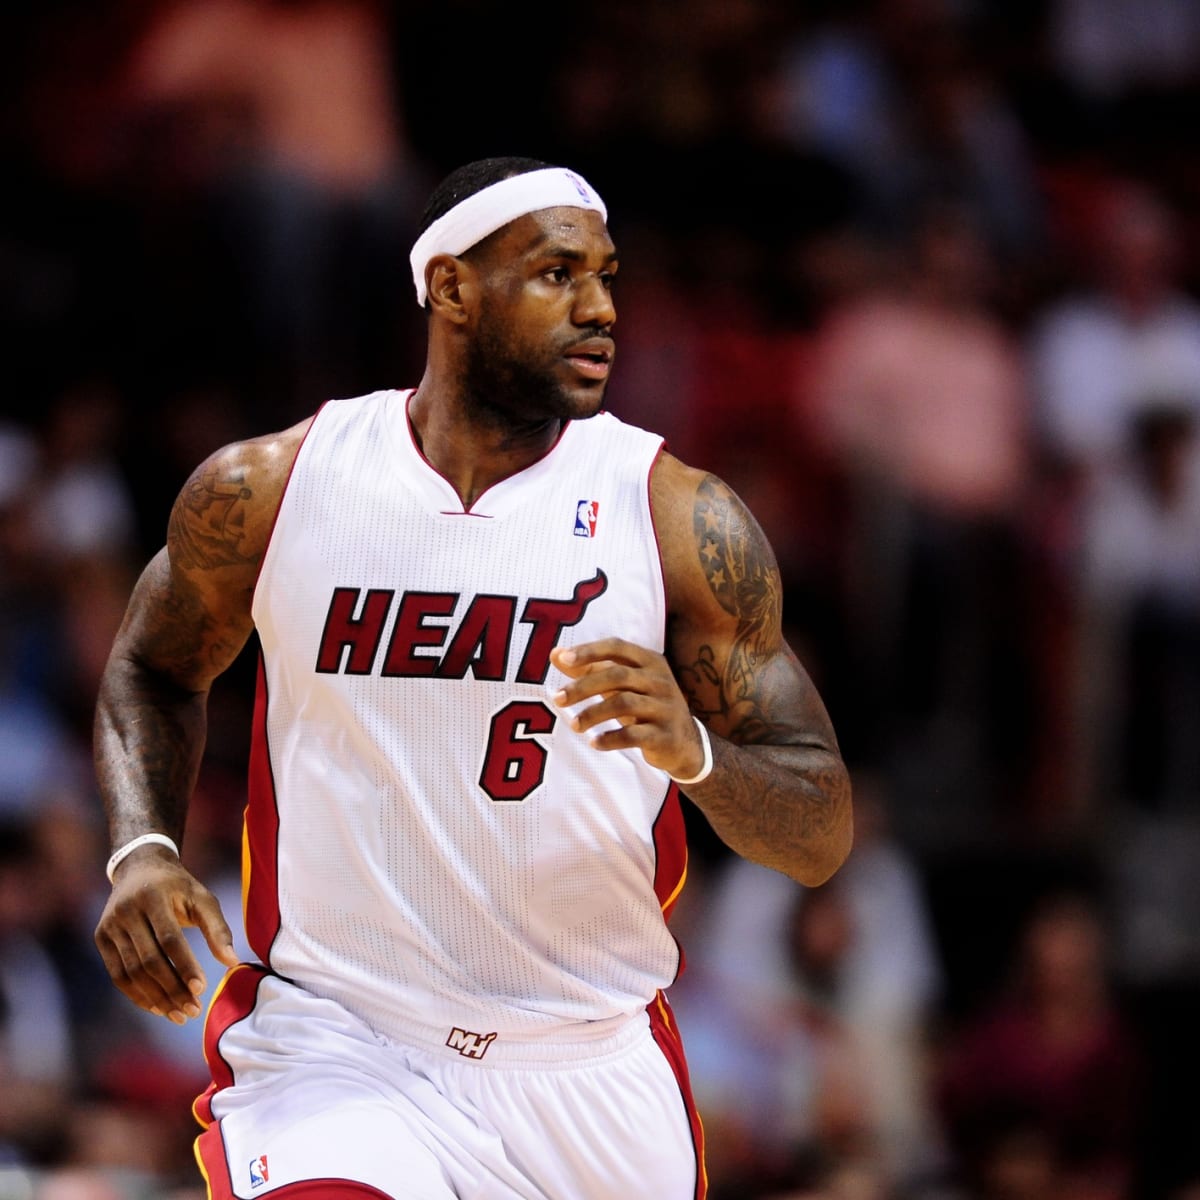 LeBron James' jersey from Game 7 of 2013 NBA Finals sells for over $3.6  million